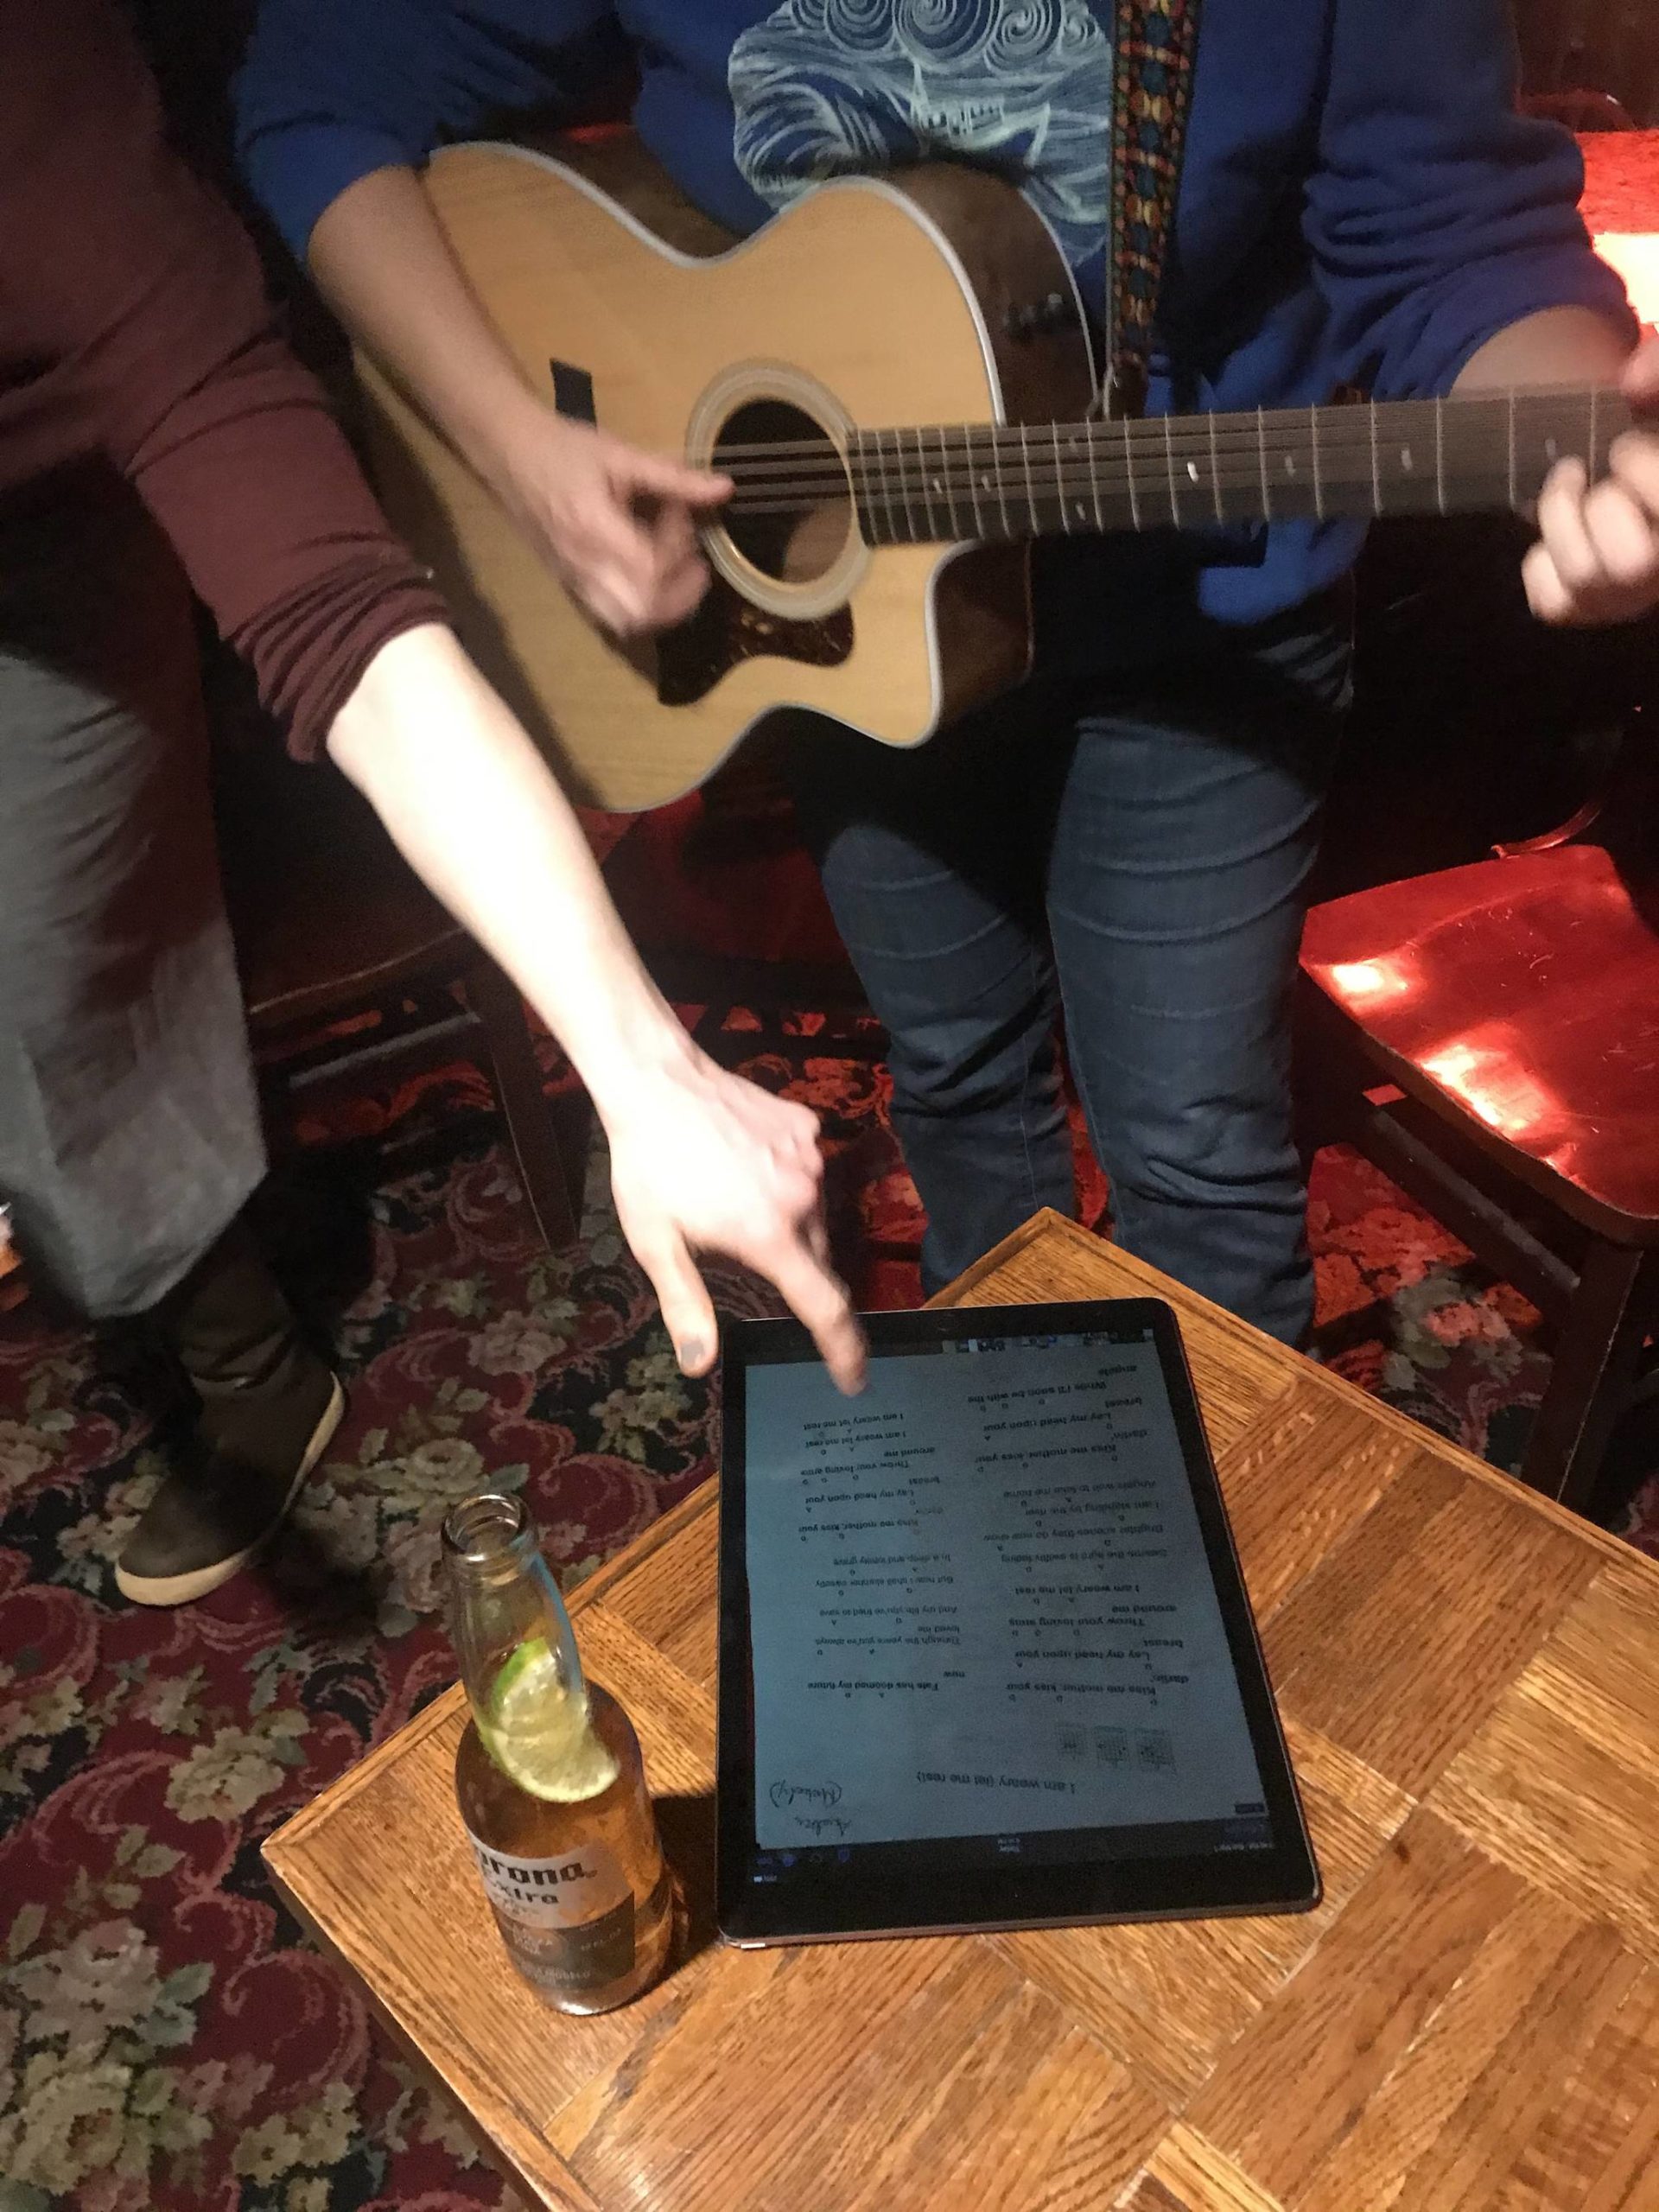 Musicians share music during a Bluegrass Slow Jam at the Alaskan Bar on Sunday, March 1, 2020. (Mollie Barnes |For the Juneau Empire)